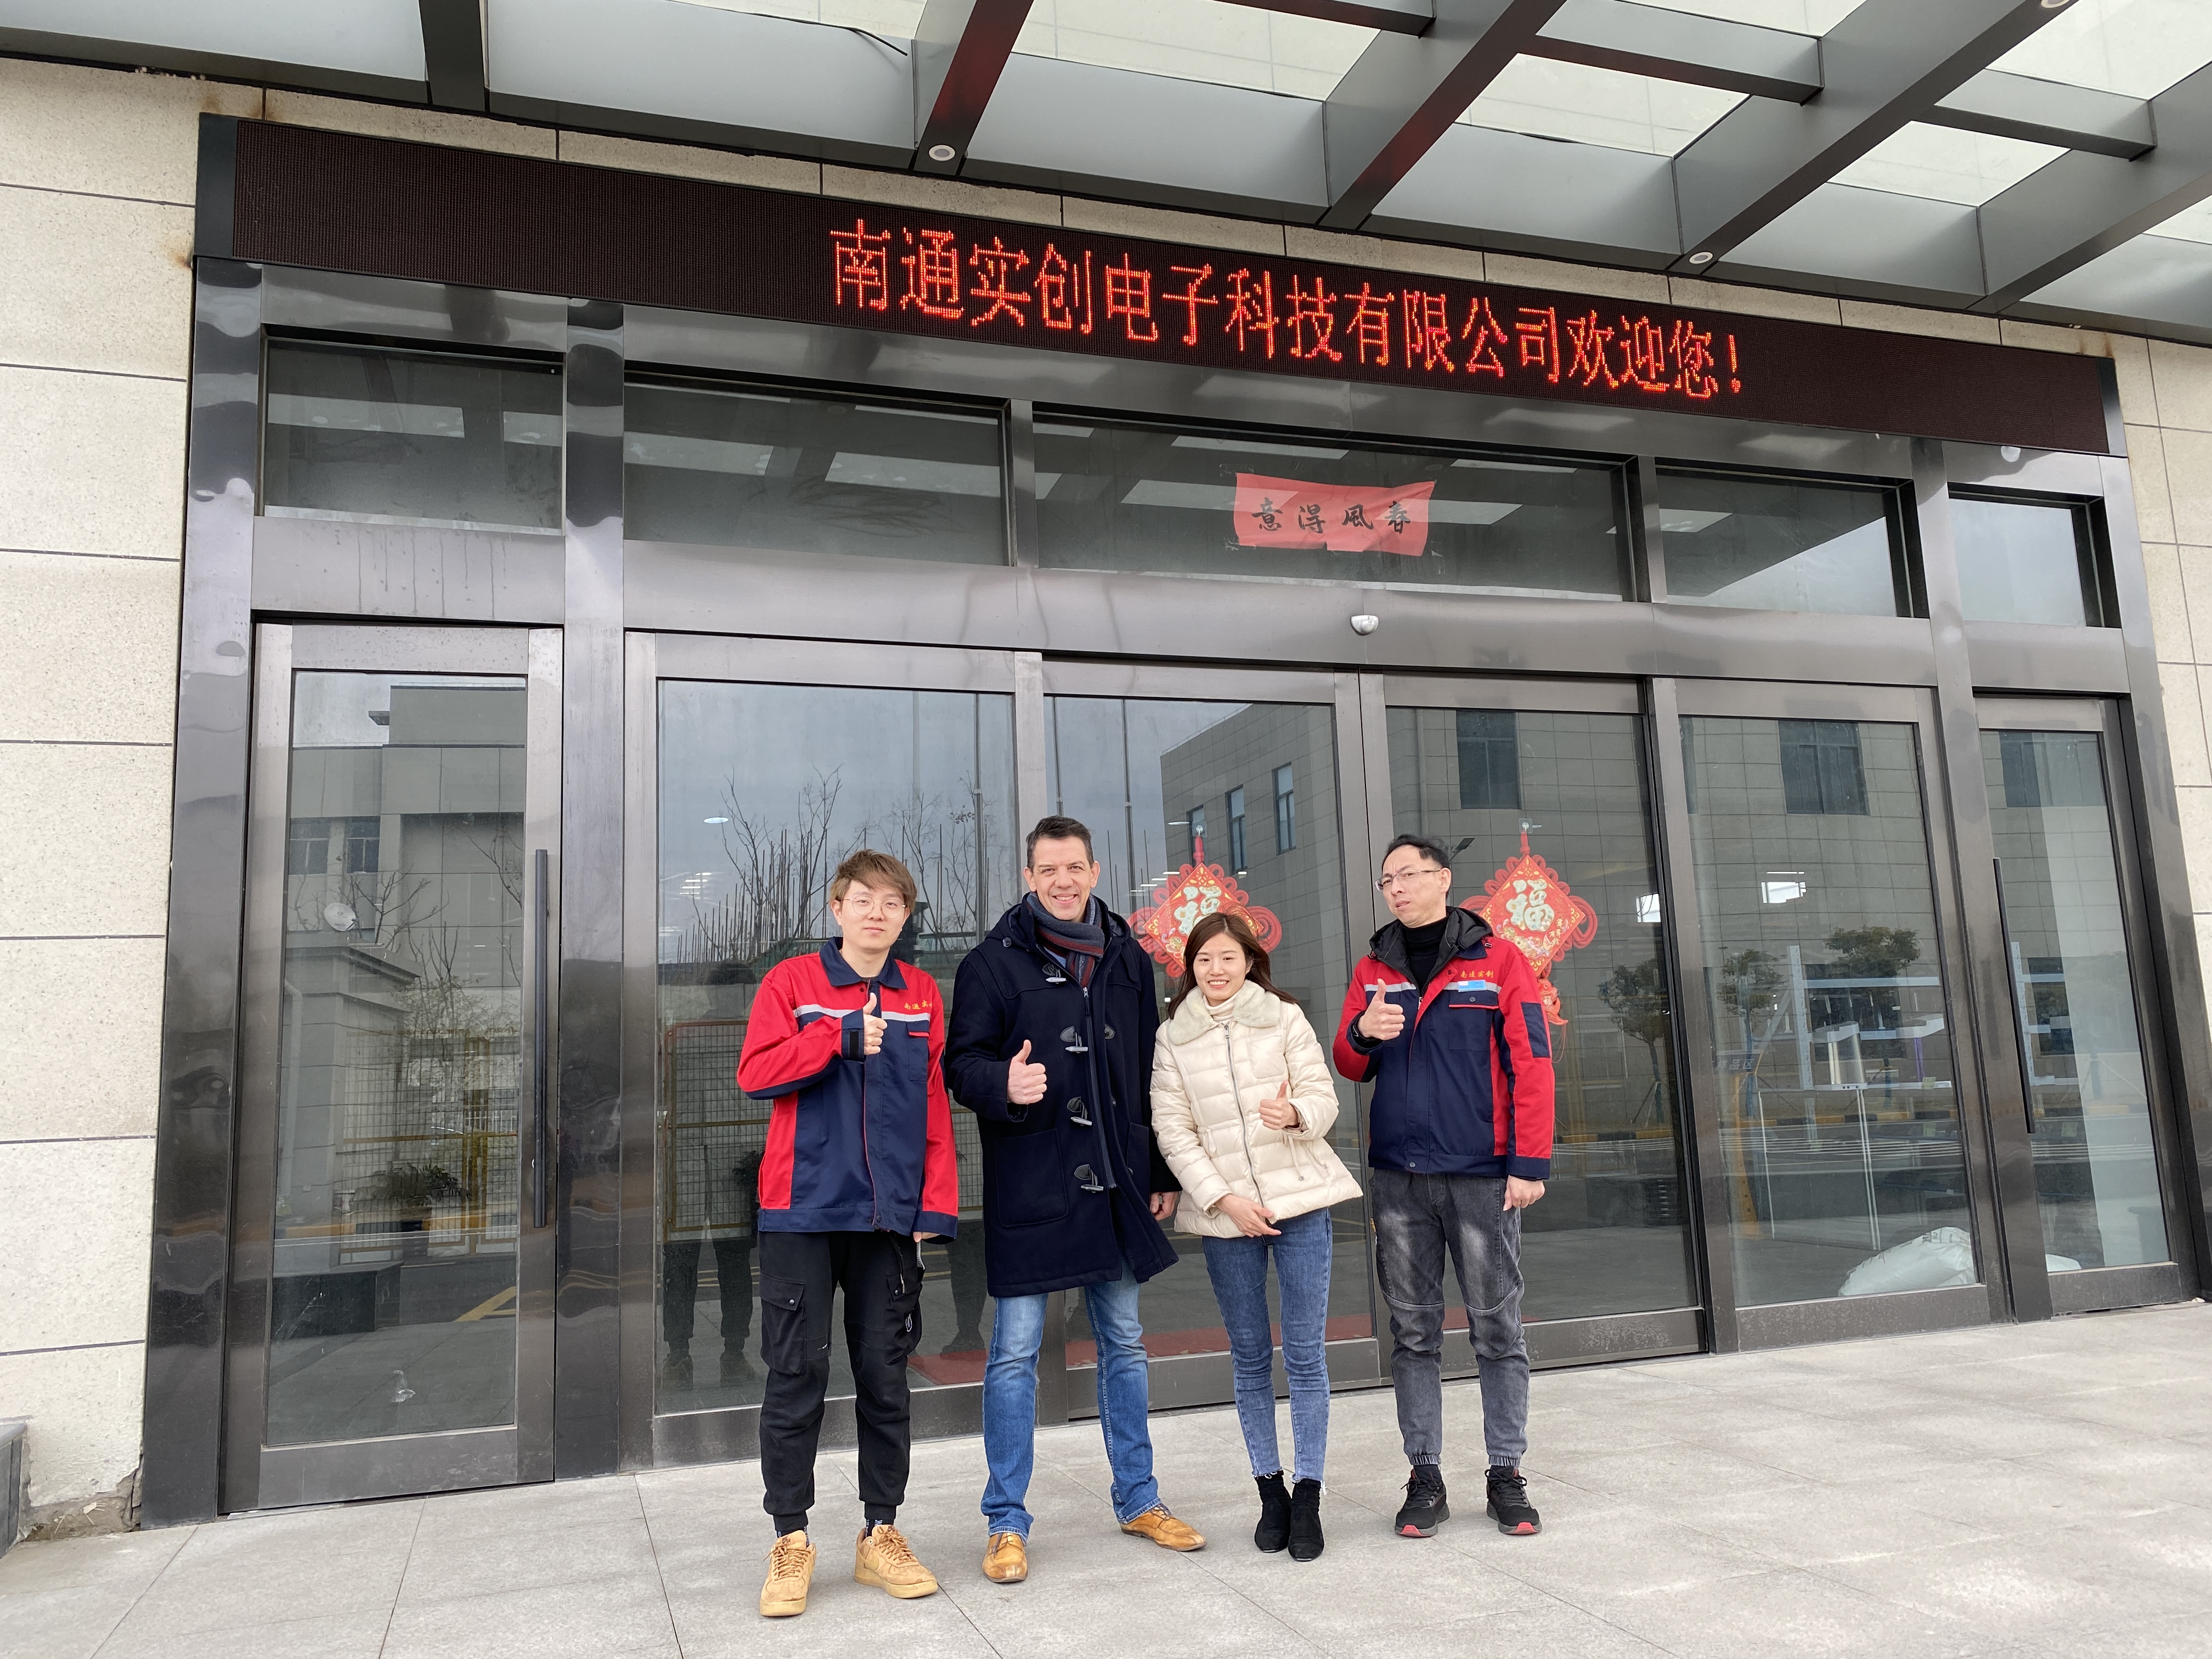 French customers come to visit and guide Nantong company